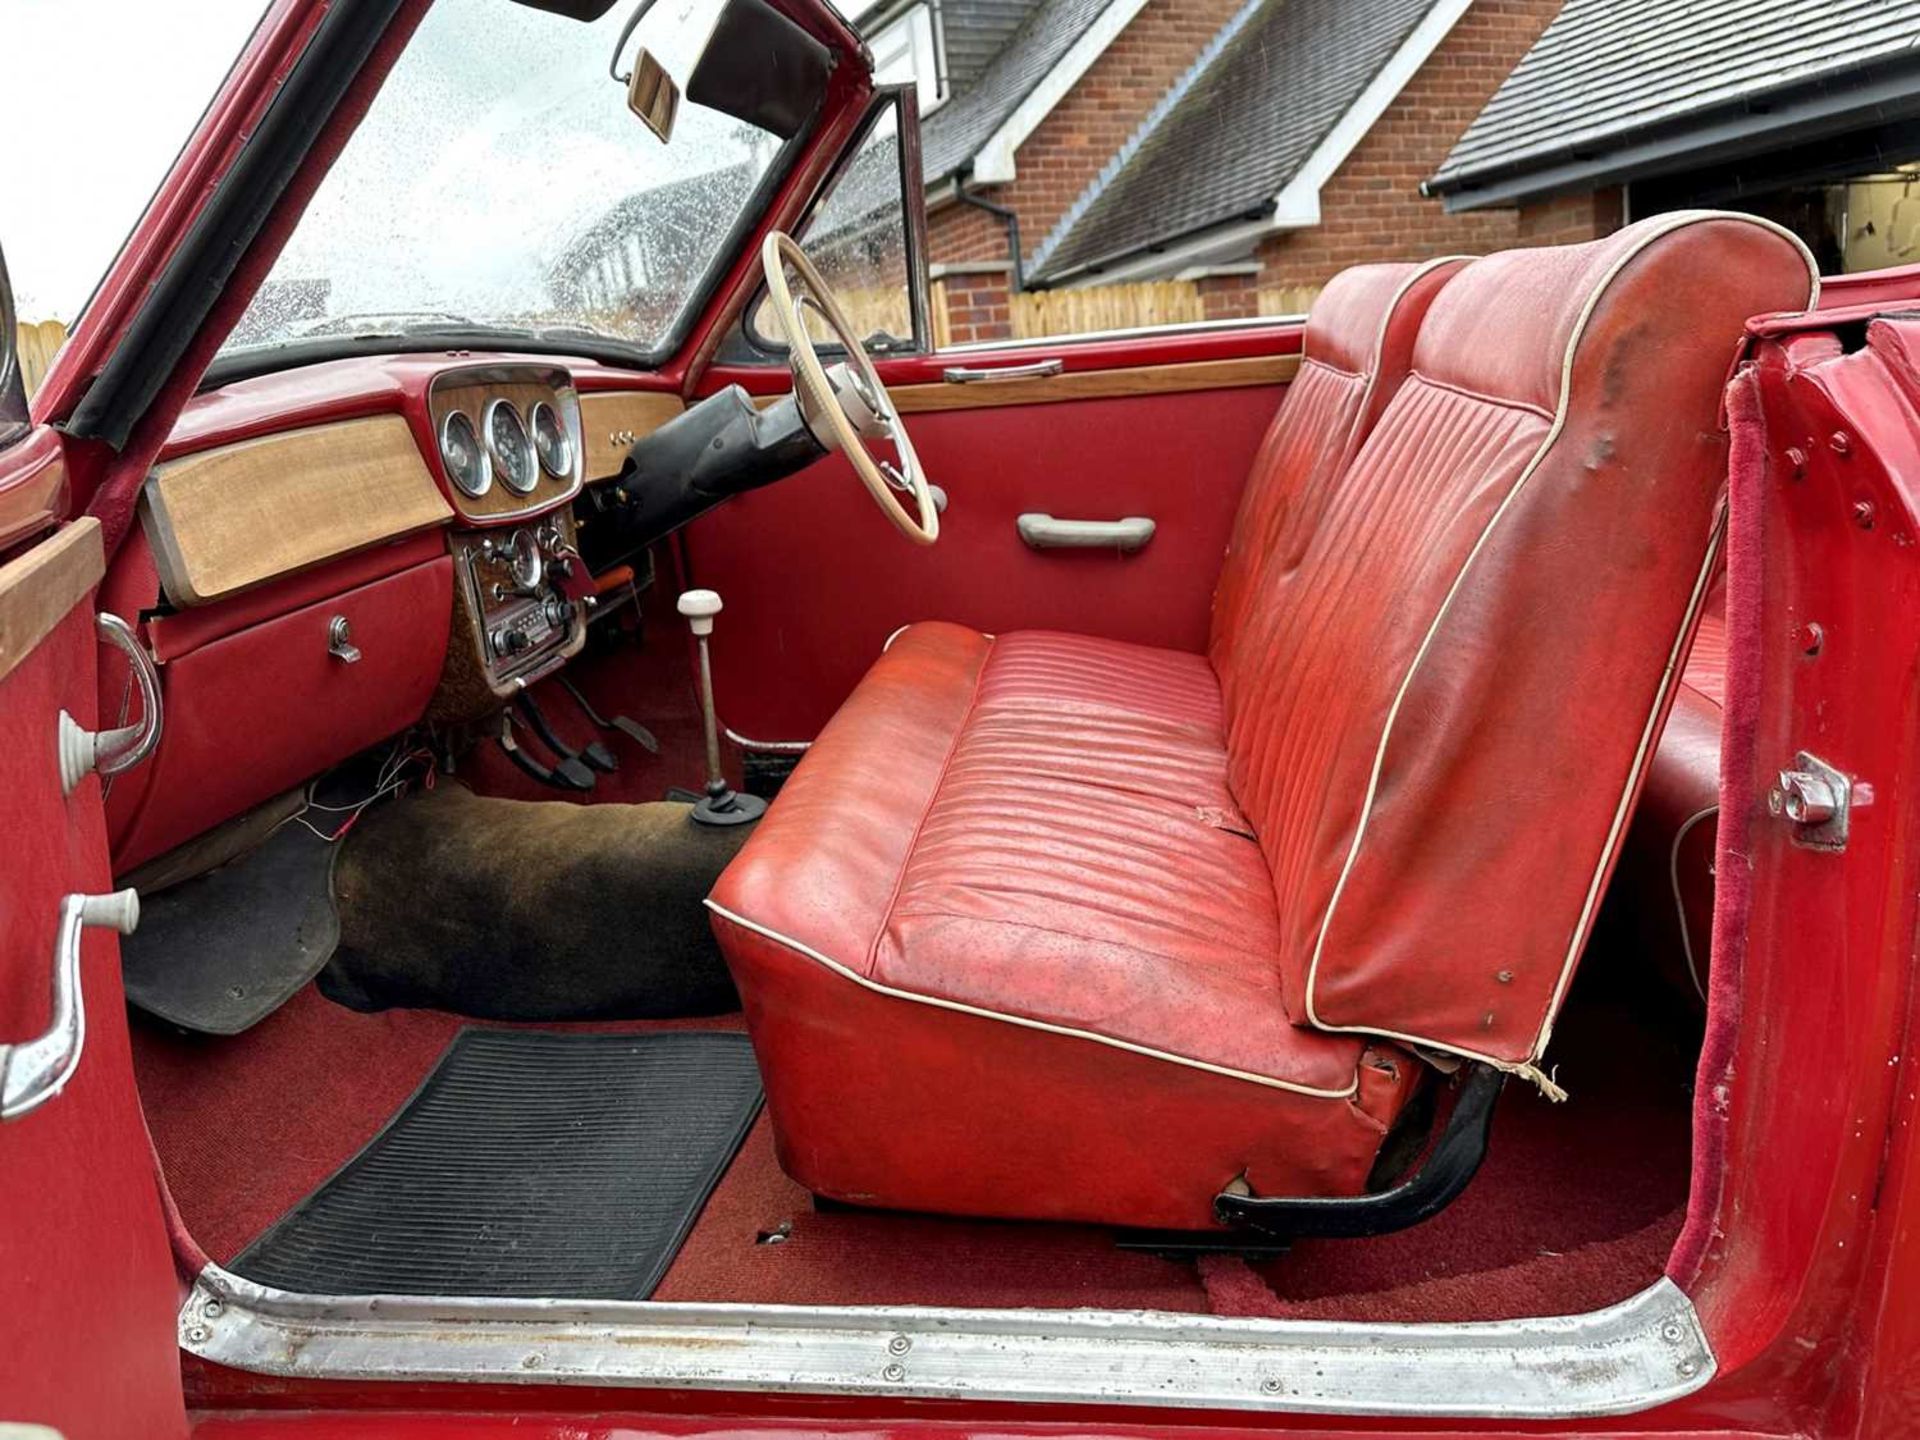 1961 Singer Gazelle Convertible Comes complete with overdrive, period radio and badge bar - Bild 44 aus 95